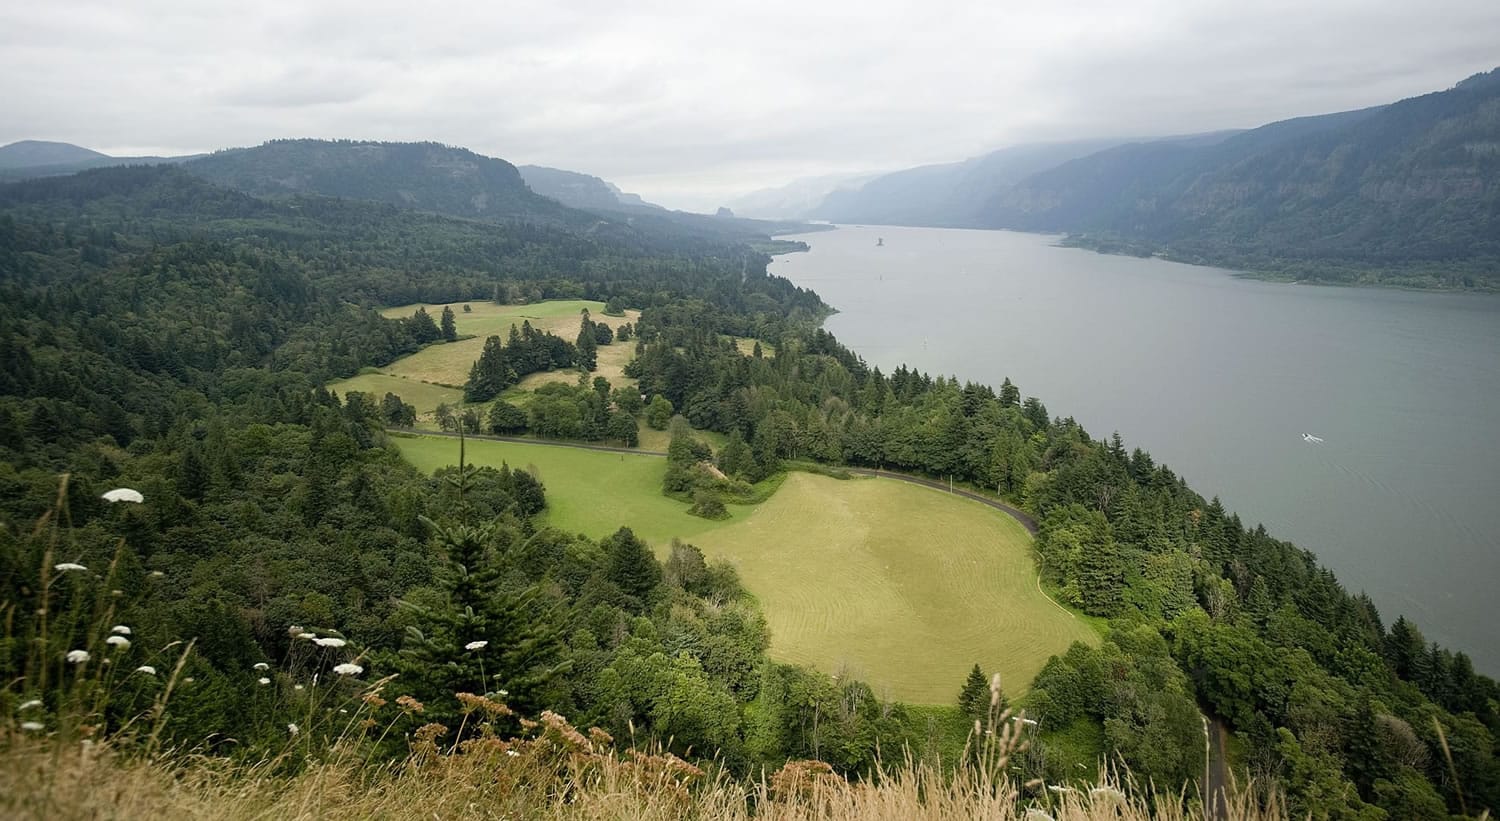 Cape Horn is among the areas that will be affected by plans to connect cities to the Columbia River Gorge via trails.